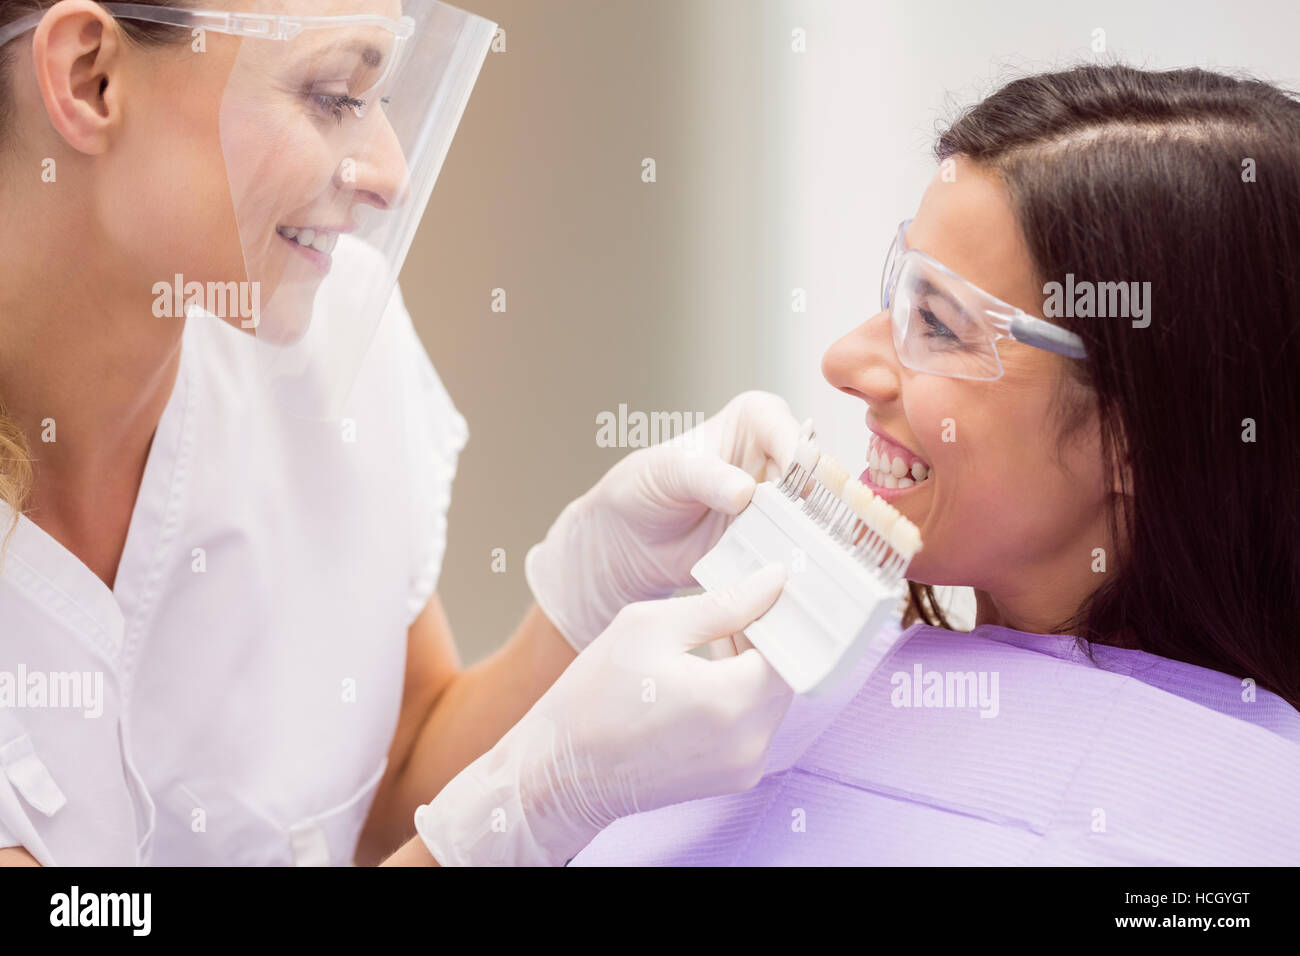 Dermatologist and female patient discussing on digital tablet Stock Photo